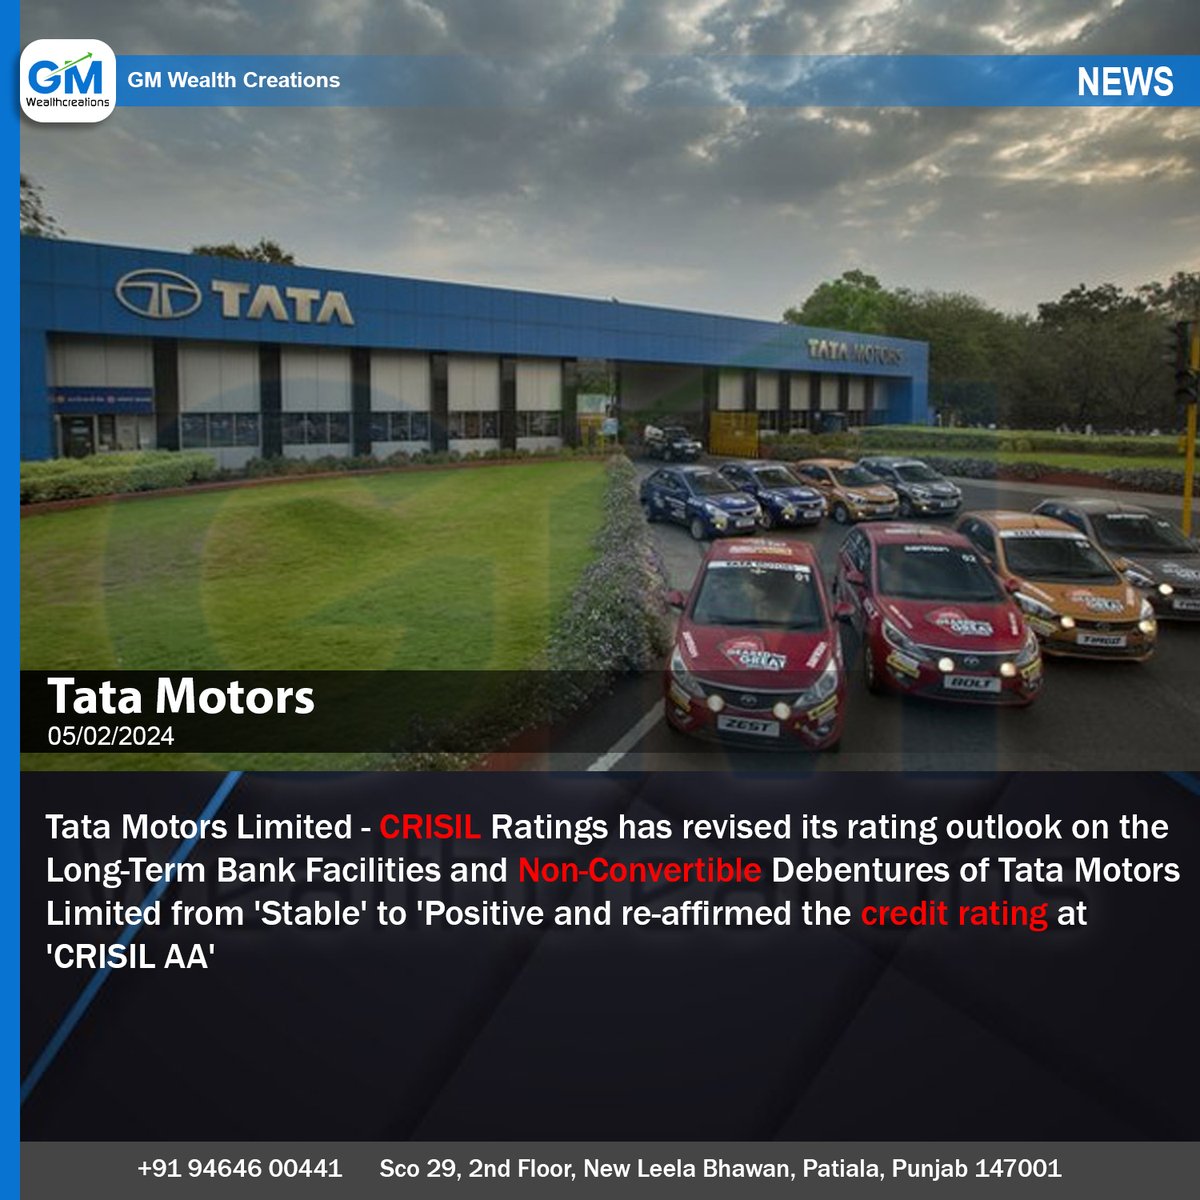 Tata Motors Limited - CRISIL Ratings has revised its rating outlook on the Long-Term Bank Facilities and Non-Convertible Debentures of Tata Motors Limited from 'Stable' to 'Positive and re-affirmed the credit rating at 'CRISIL AA'

#TataMotors #tatapower #tatasteelchess